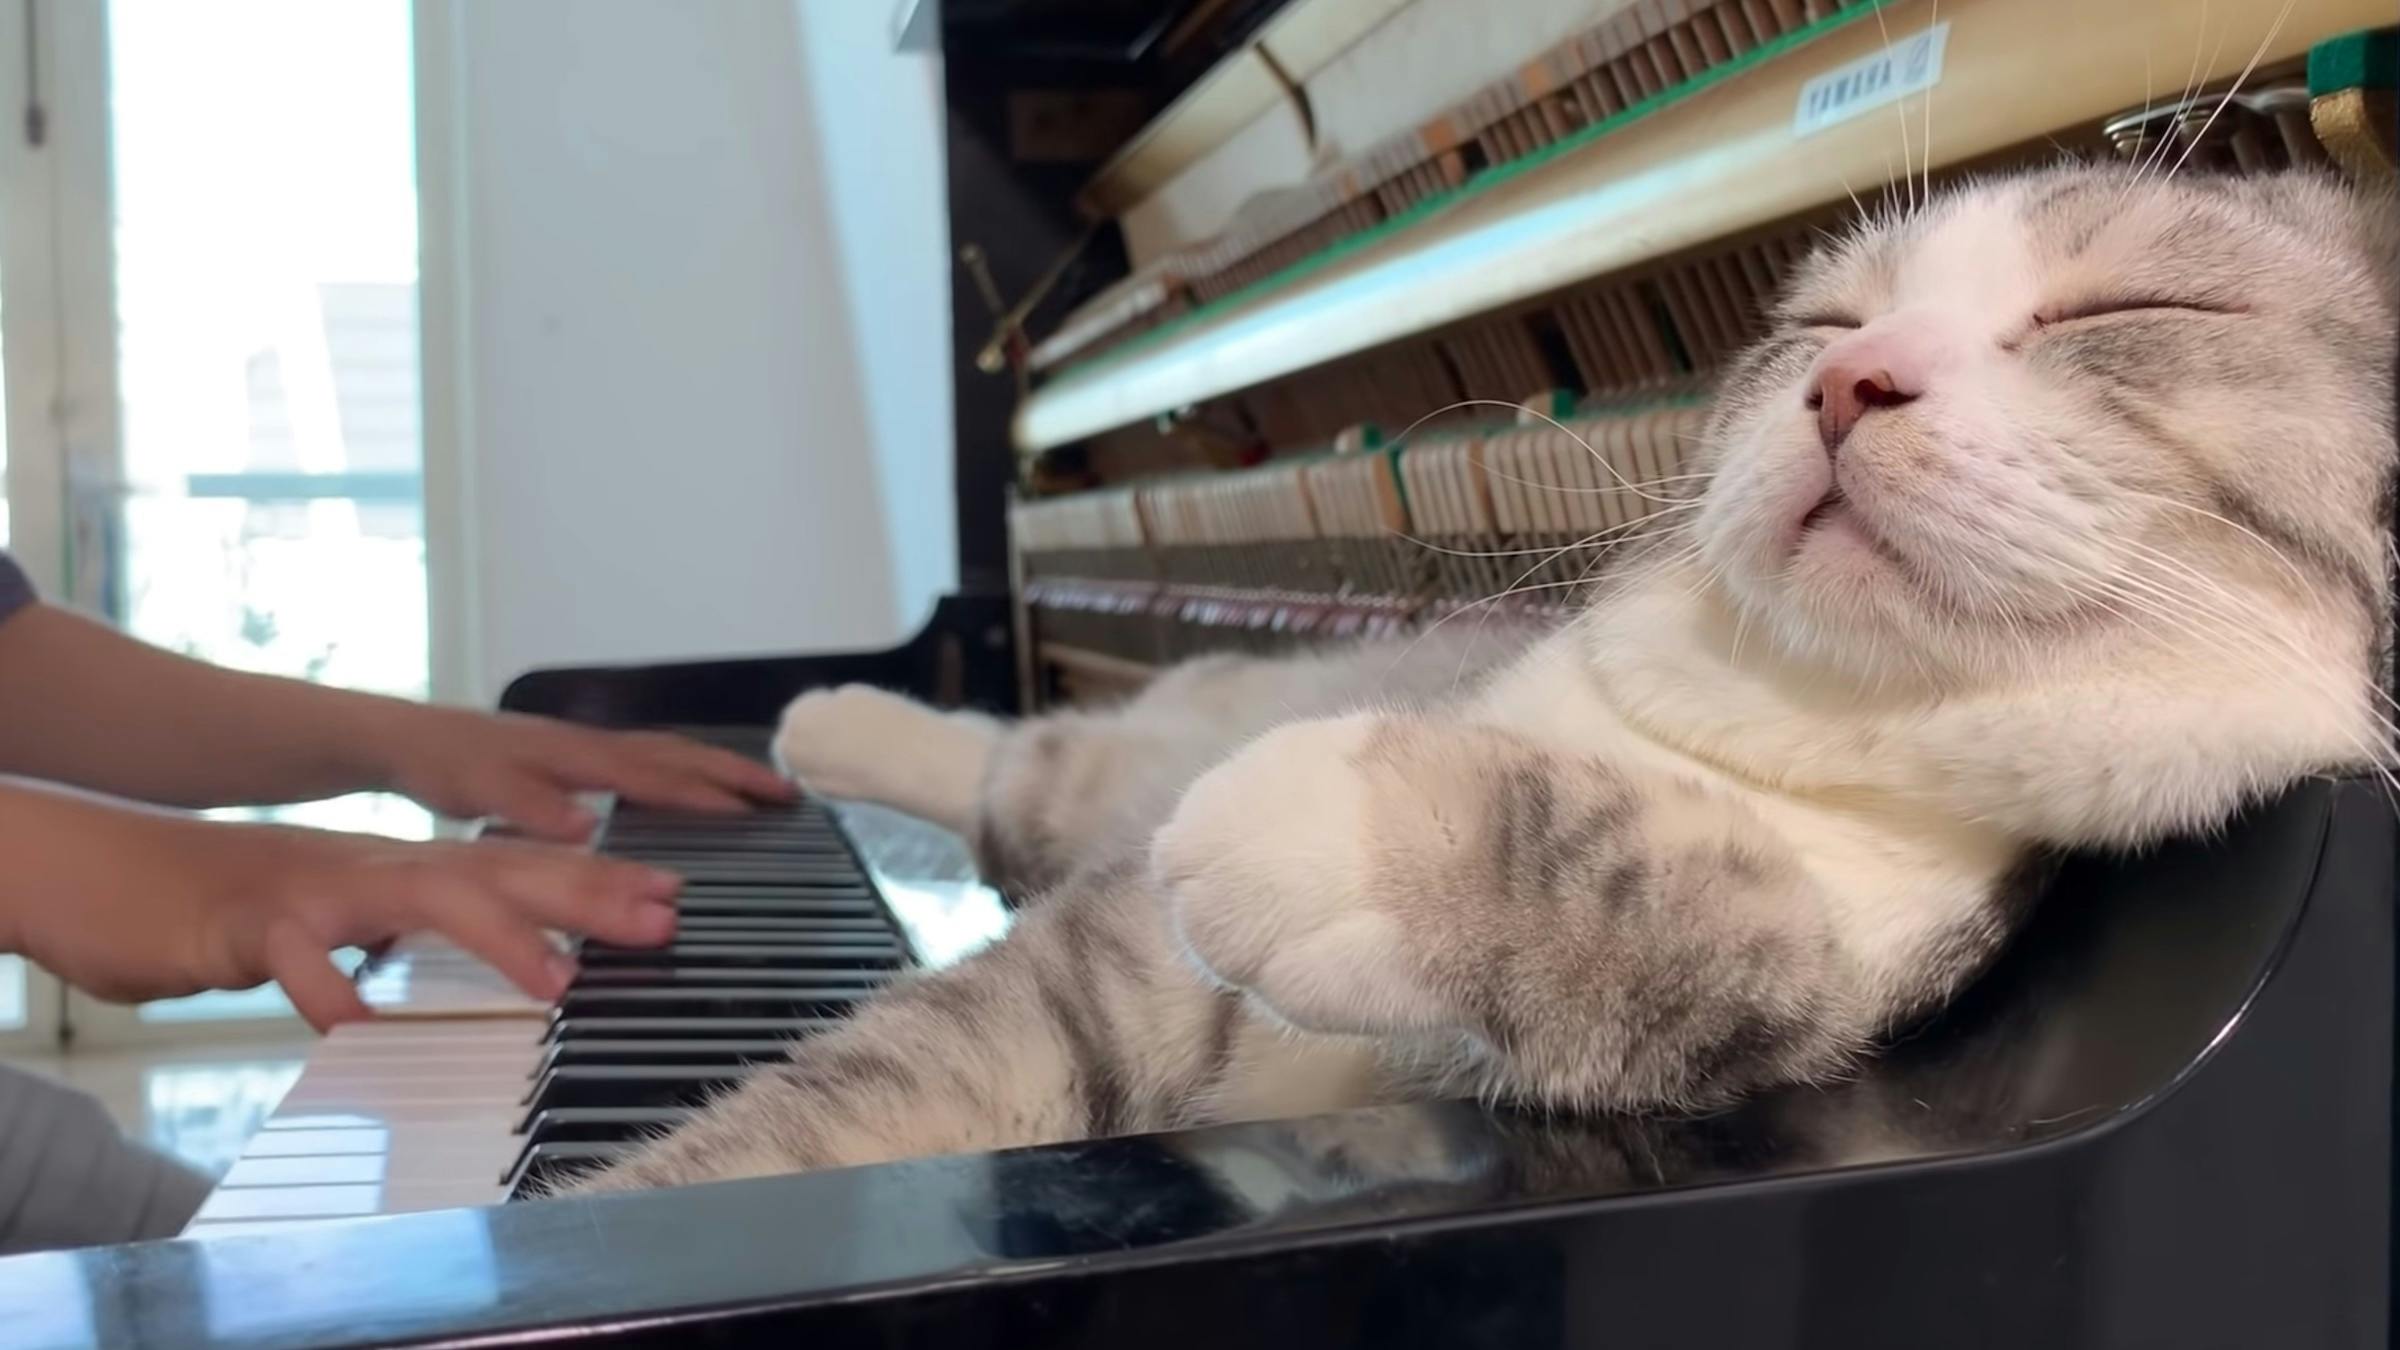 Watch Linkin Park's Numb Played On A Piano With A Cat On It